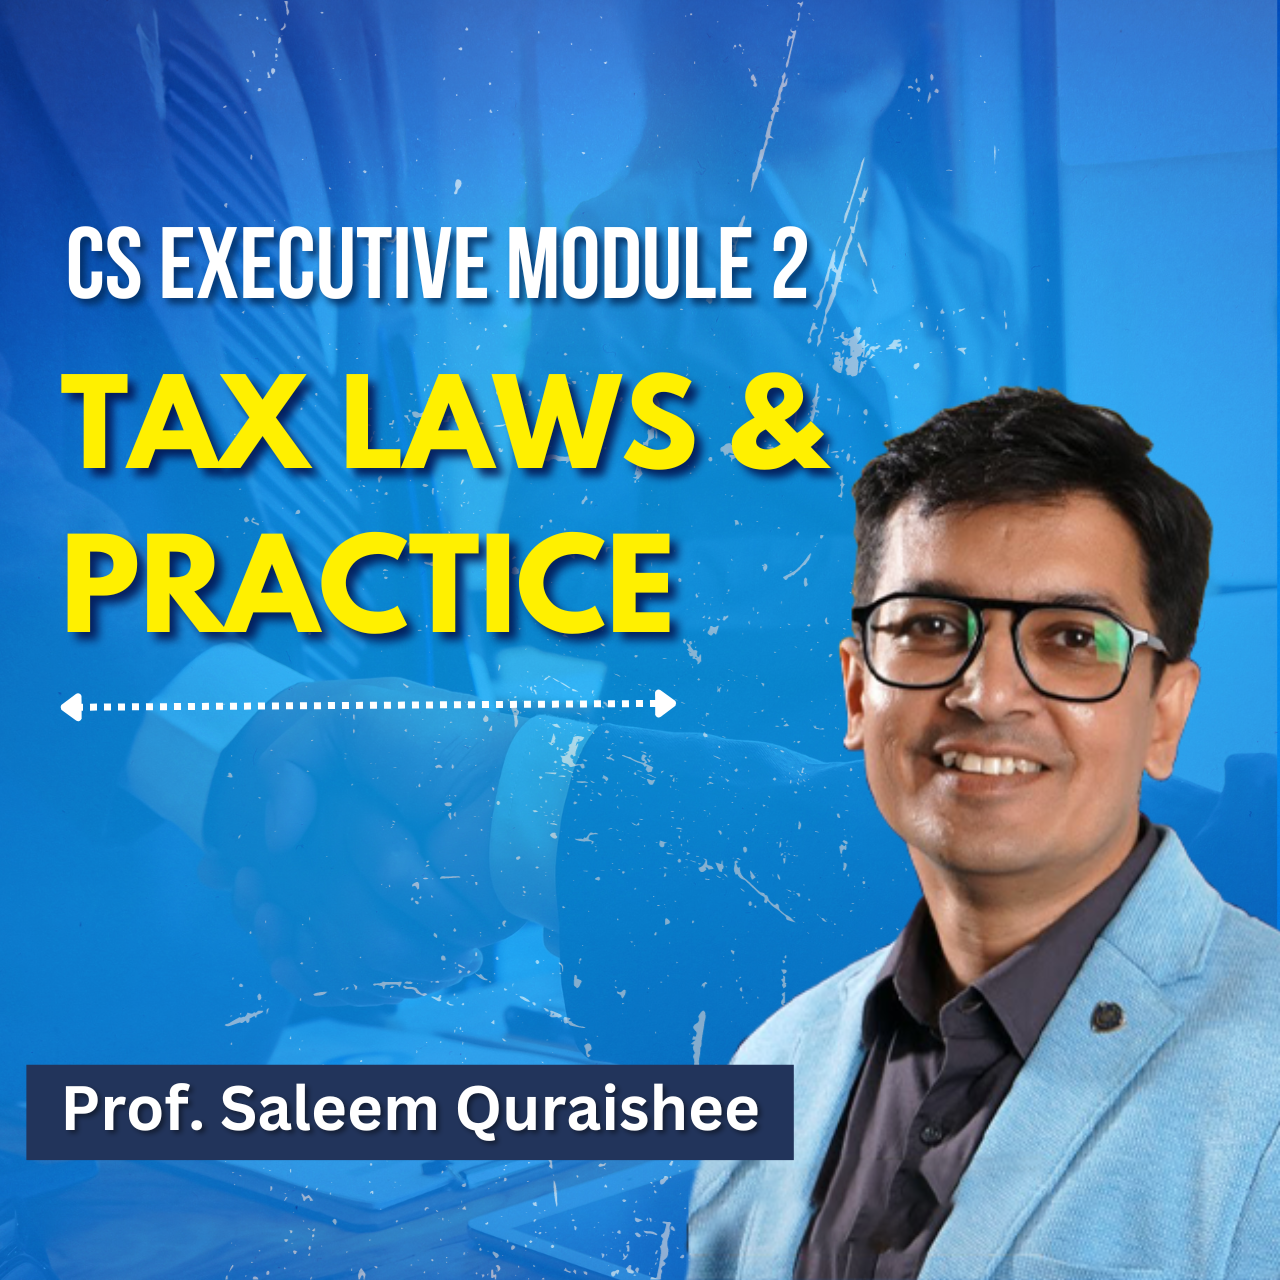 CS Executive - Tax laws and practice (Module 2) By Prof. Saleem quraishee